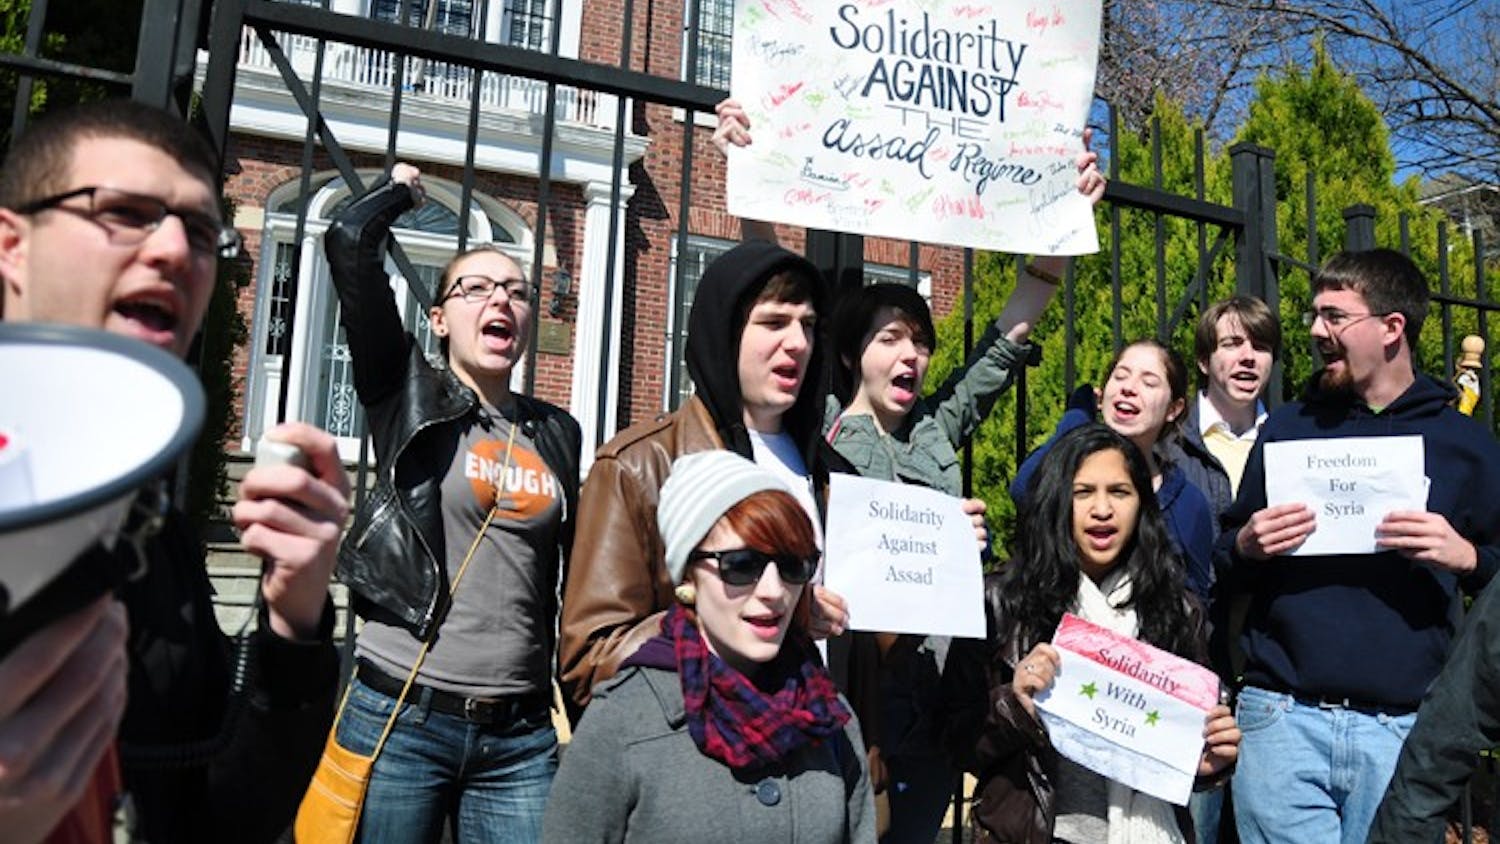 American University's chapter of STAND marched on the Embassy of Syria in Dupont Circle. Sunday, March 4, 2012.